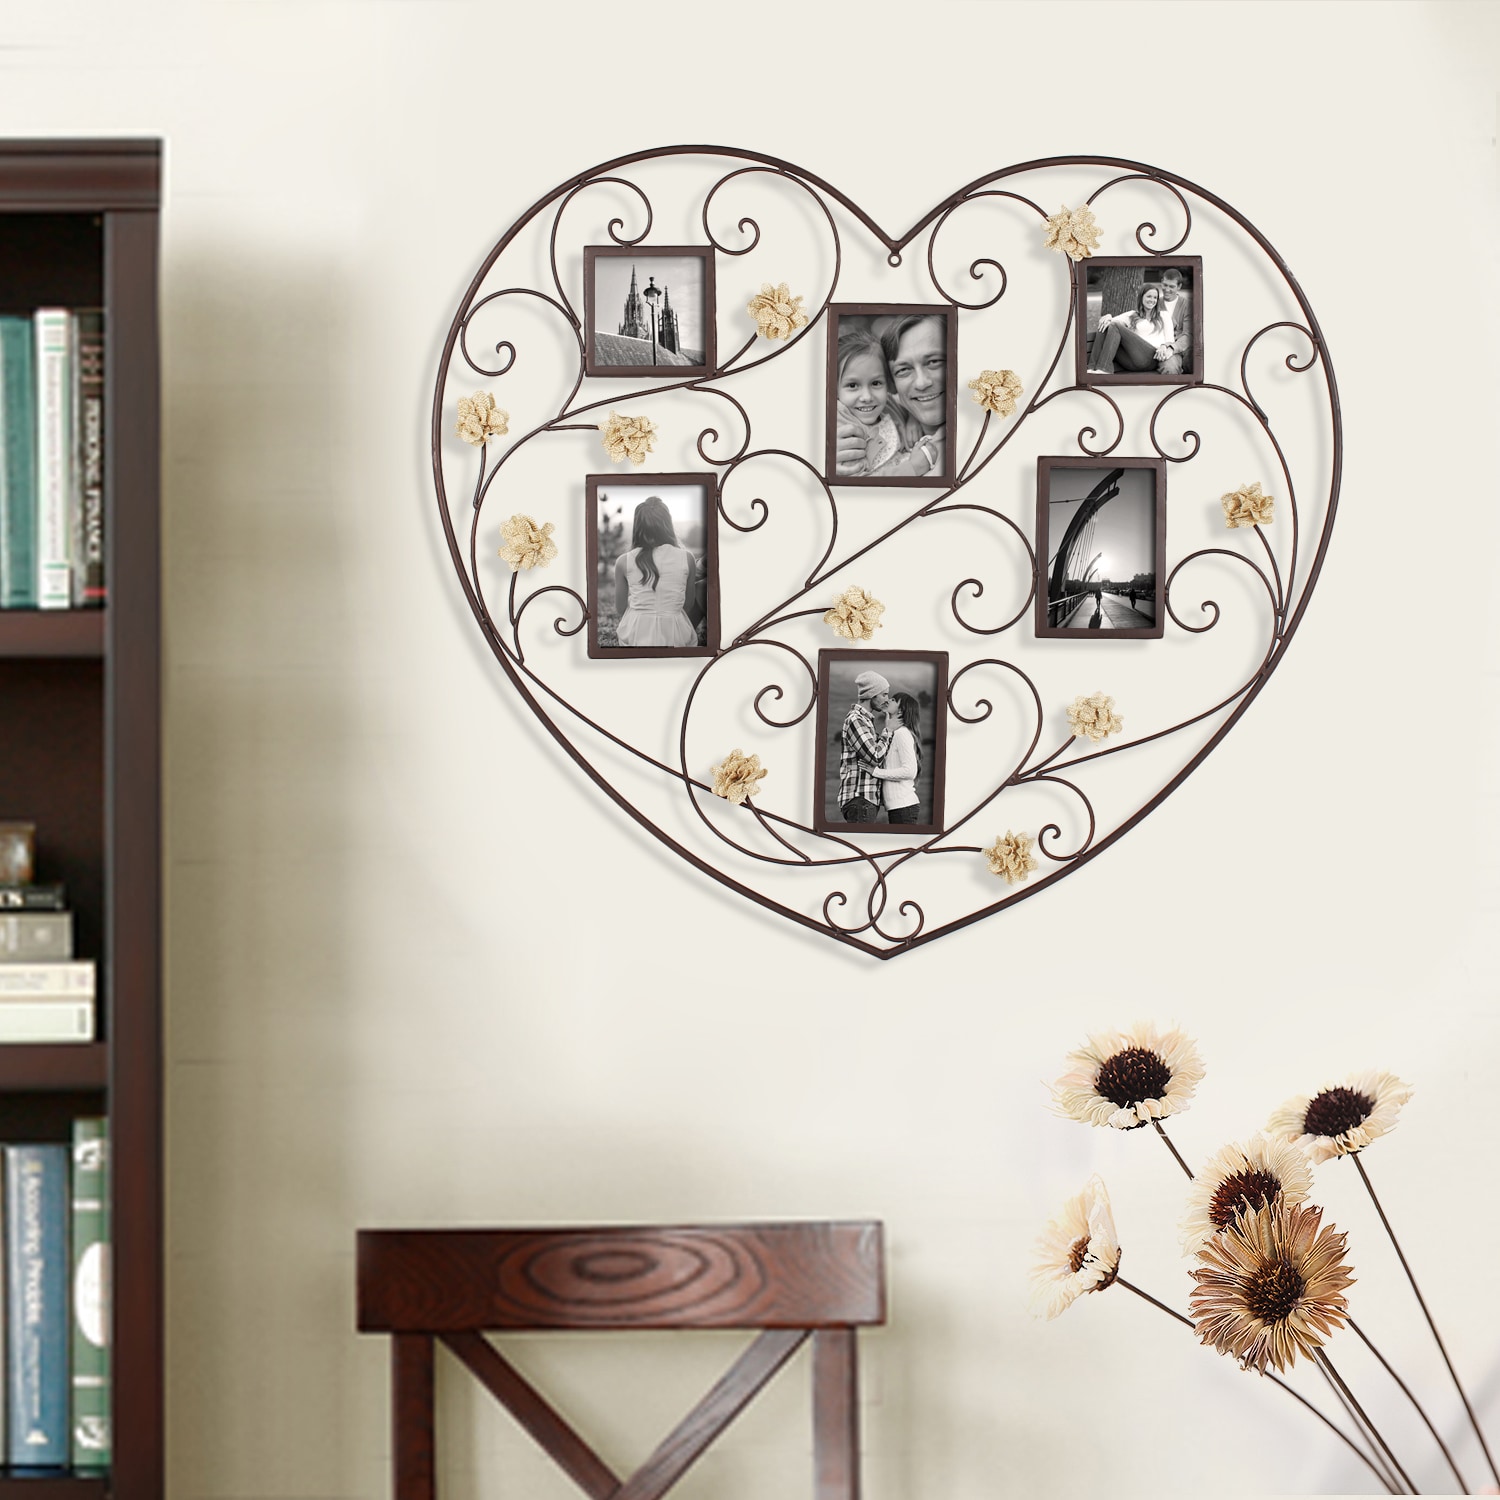 Collage Picture Frame Holds 6 Images Wall Hanging Multiple Family Photos Heart 